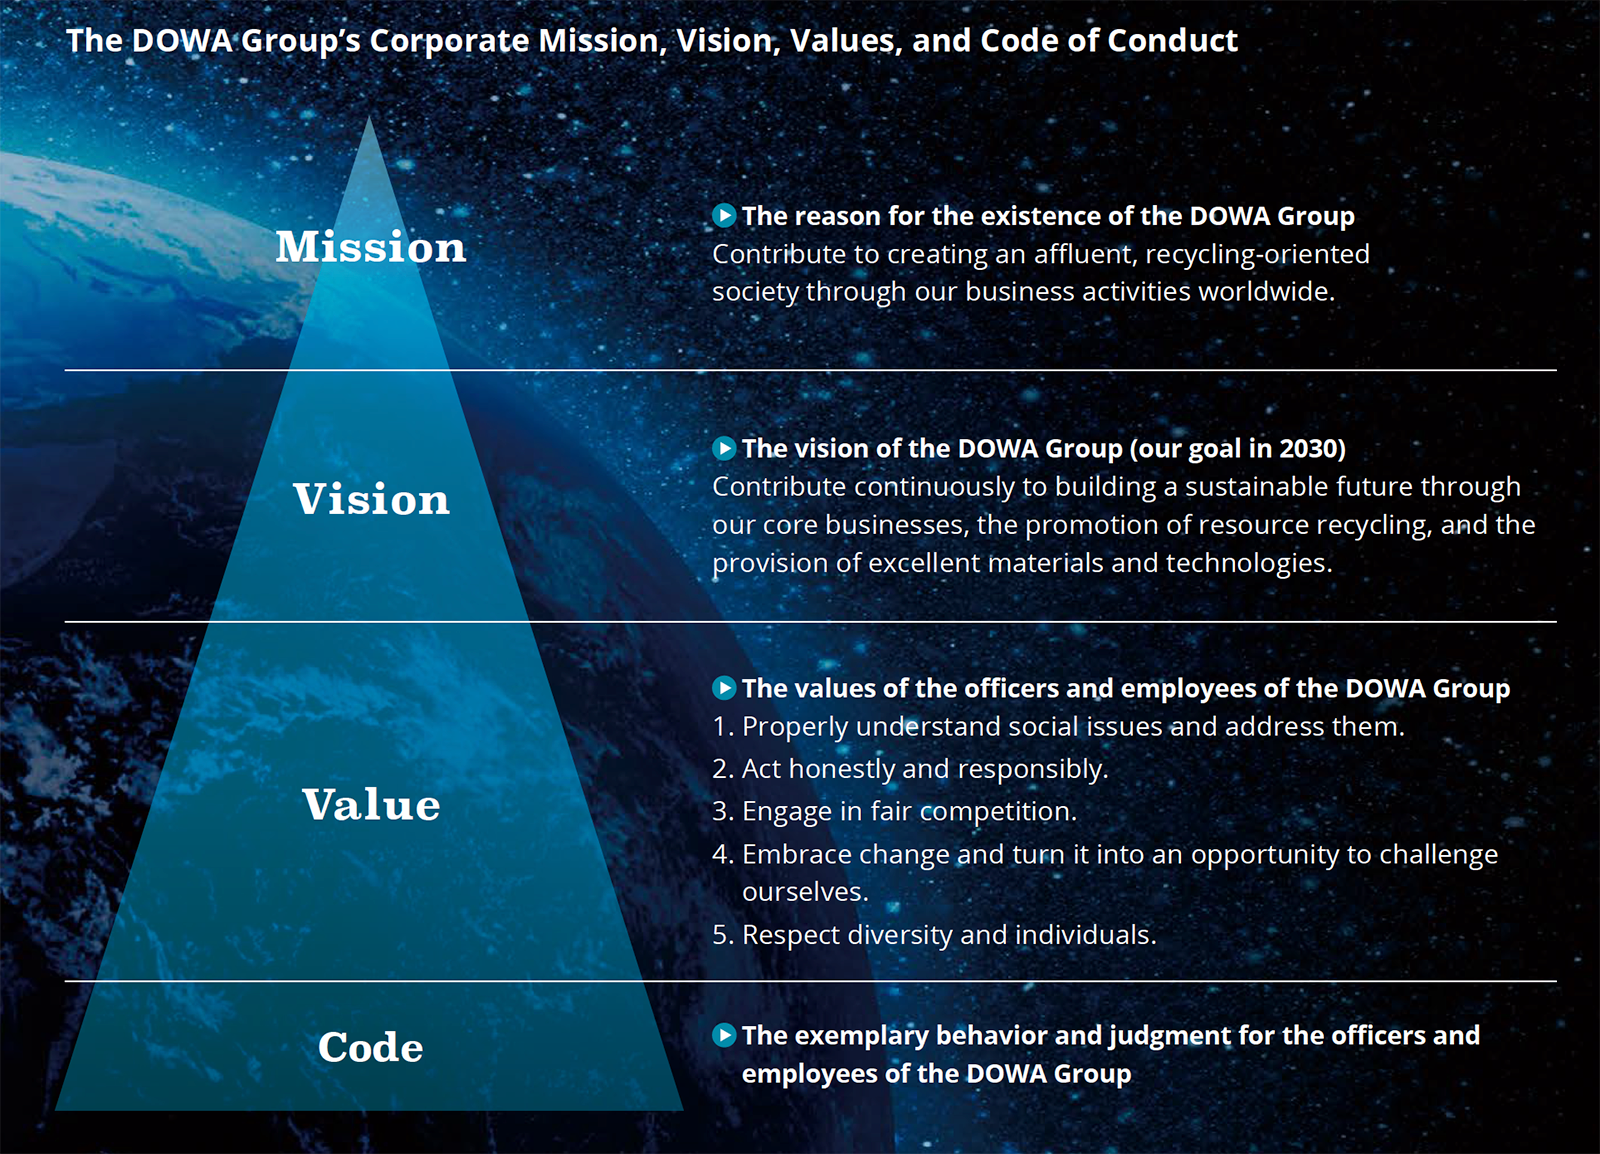 The DOWA Group’s Corporate Mission, Vision, Values, and Code of Conduct